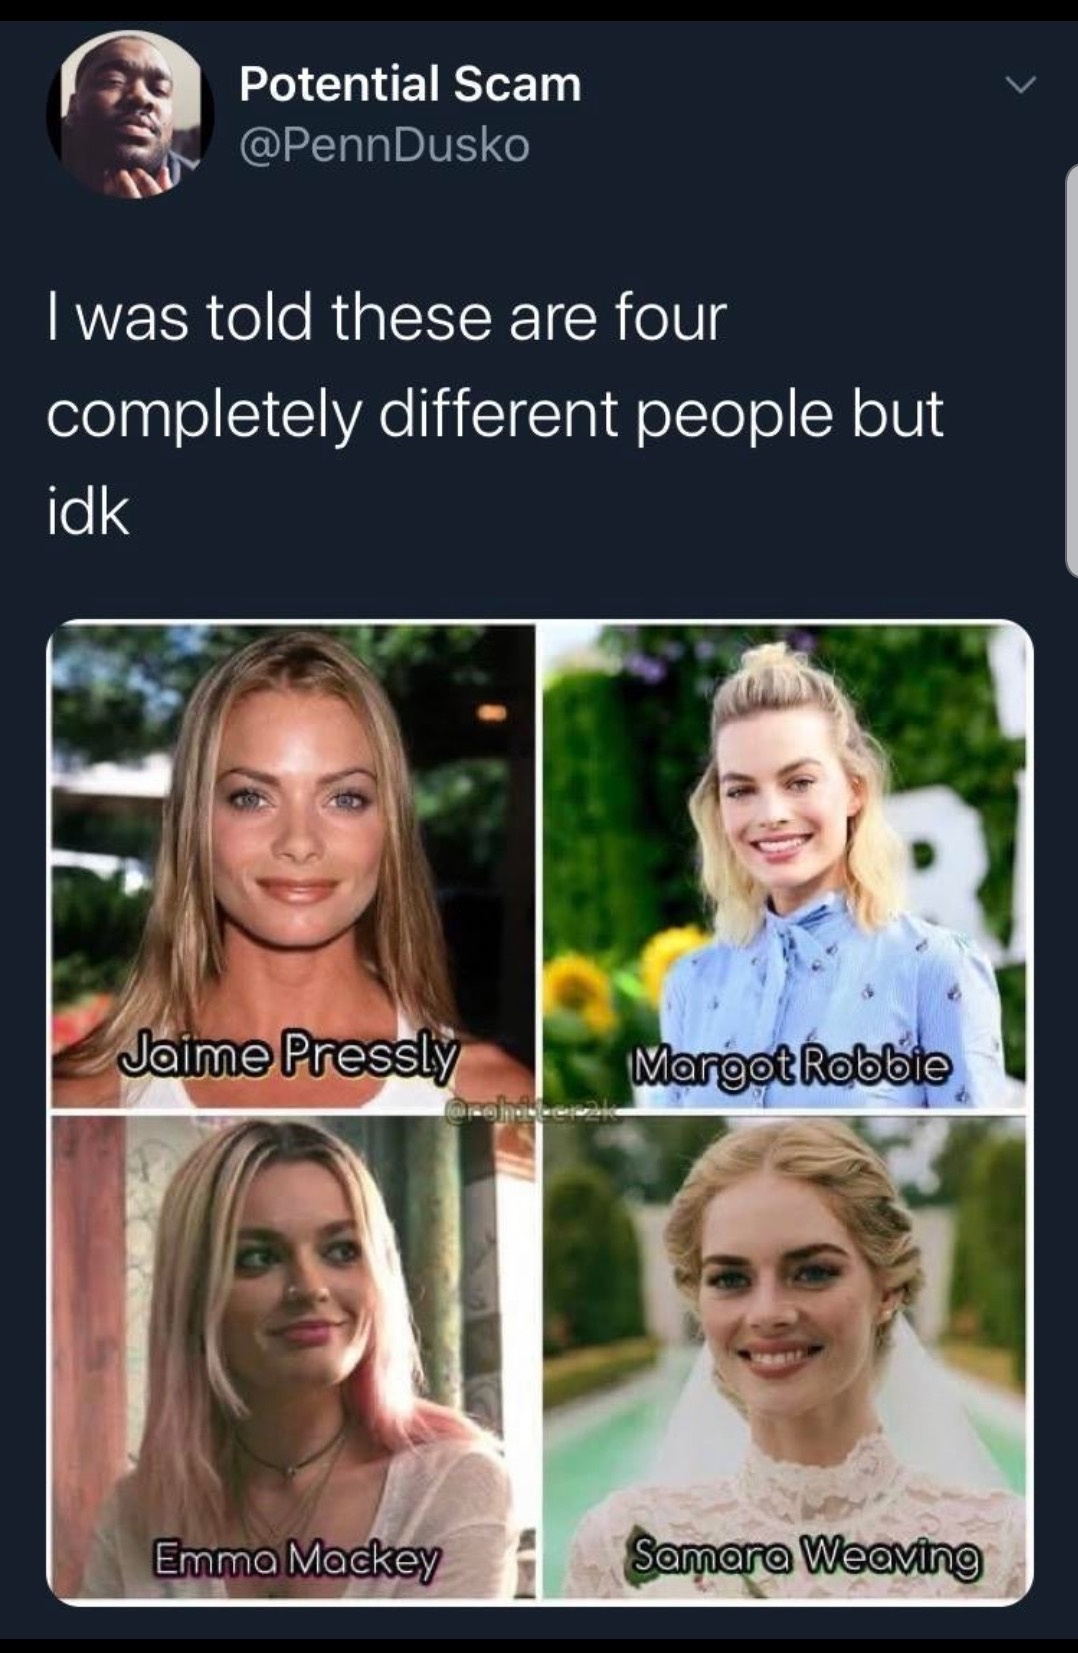 emma mackey margot robbie samara weaving - Potential Scam I was told these are four completely different people but idk Jaime Pressly Margot Robbie ohne Emma Mackey Samara Weaving